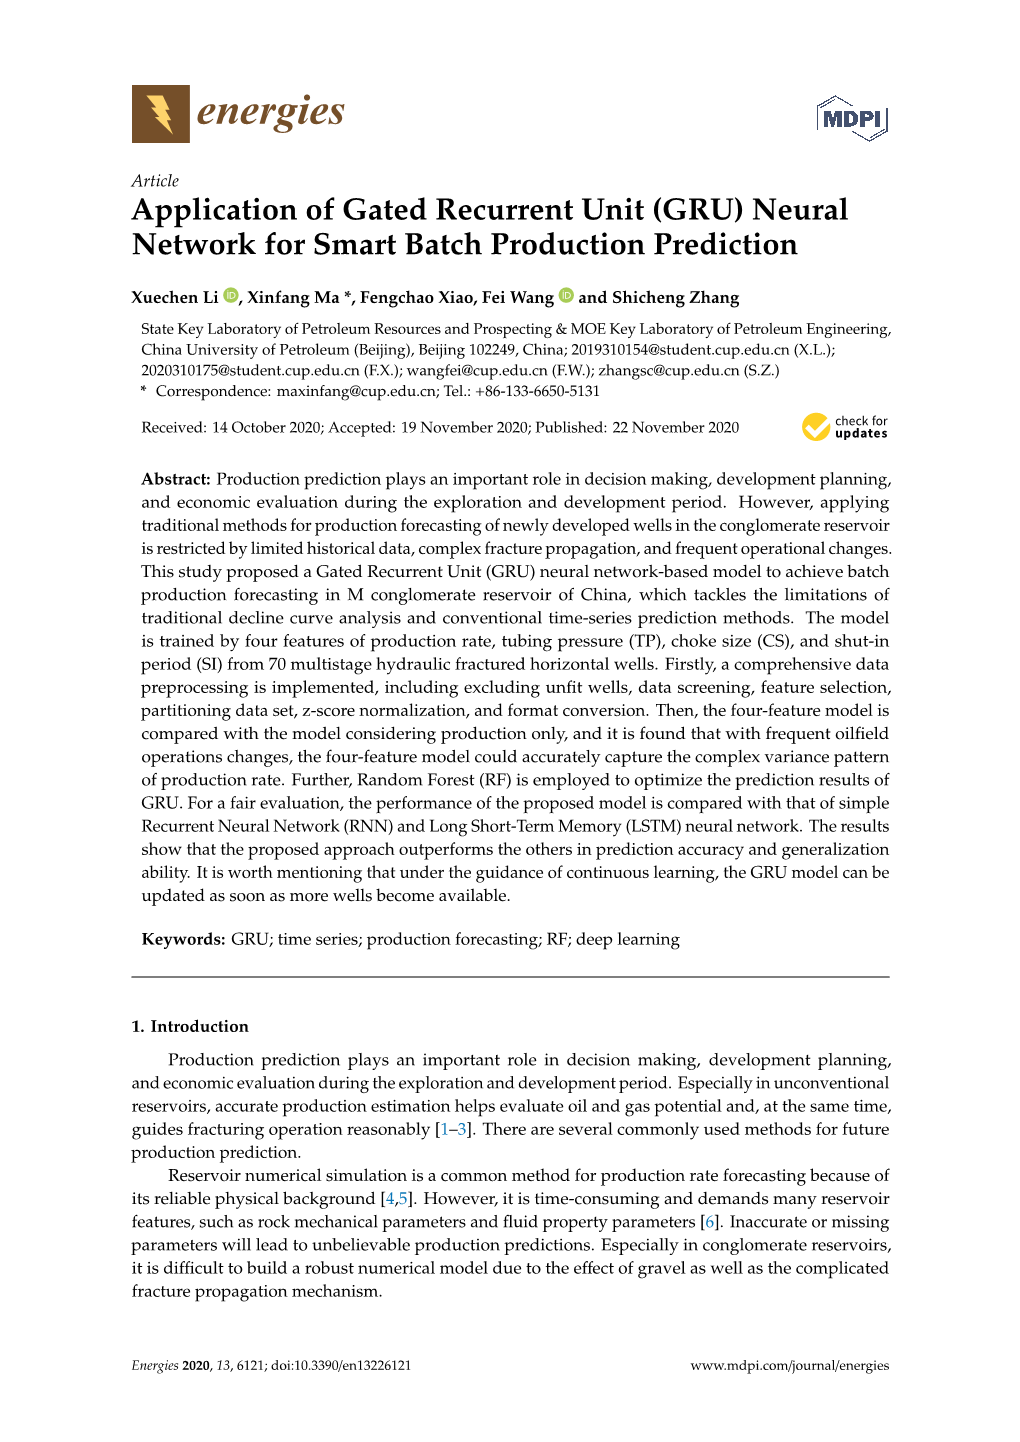 Application of Gated Recurrent Unit (GRU) Neural Network for Smart Batch Production Prediction